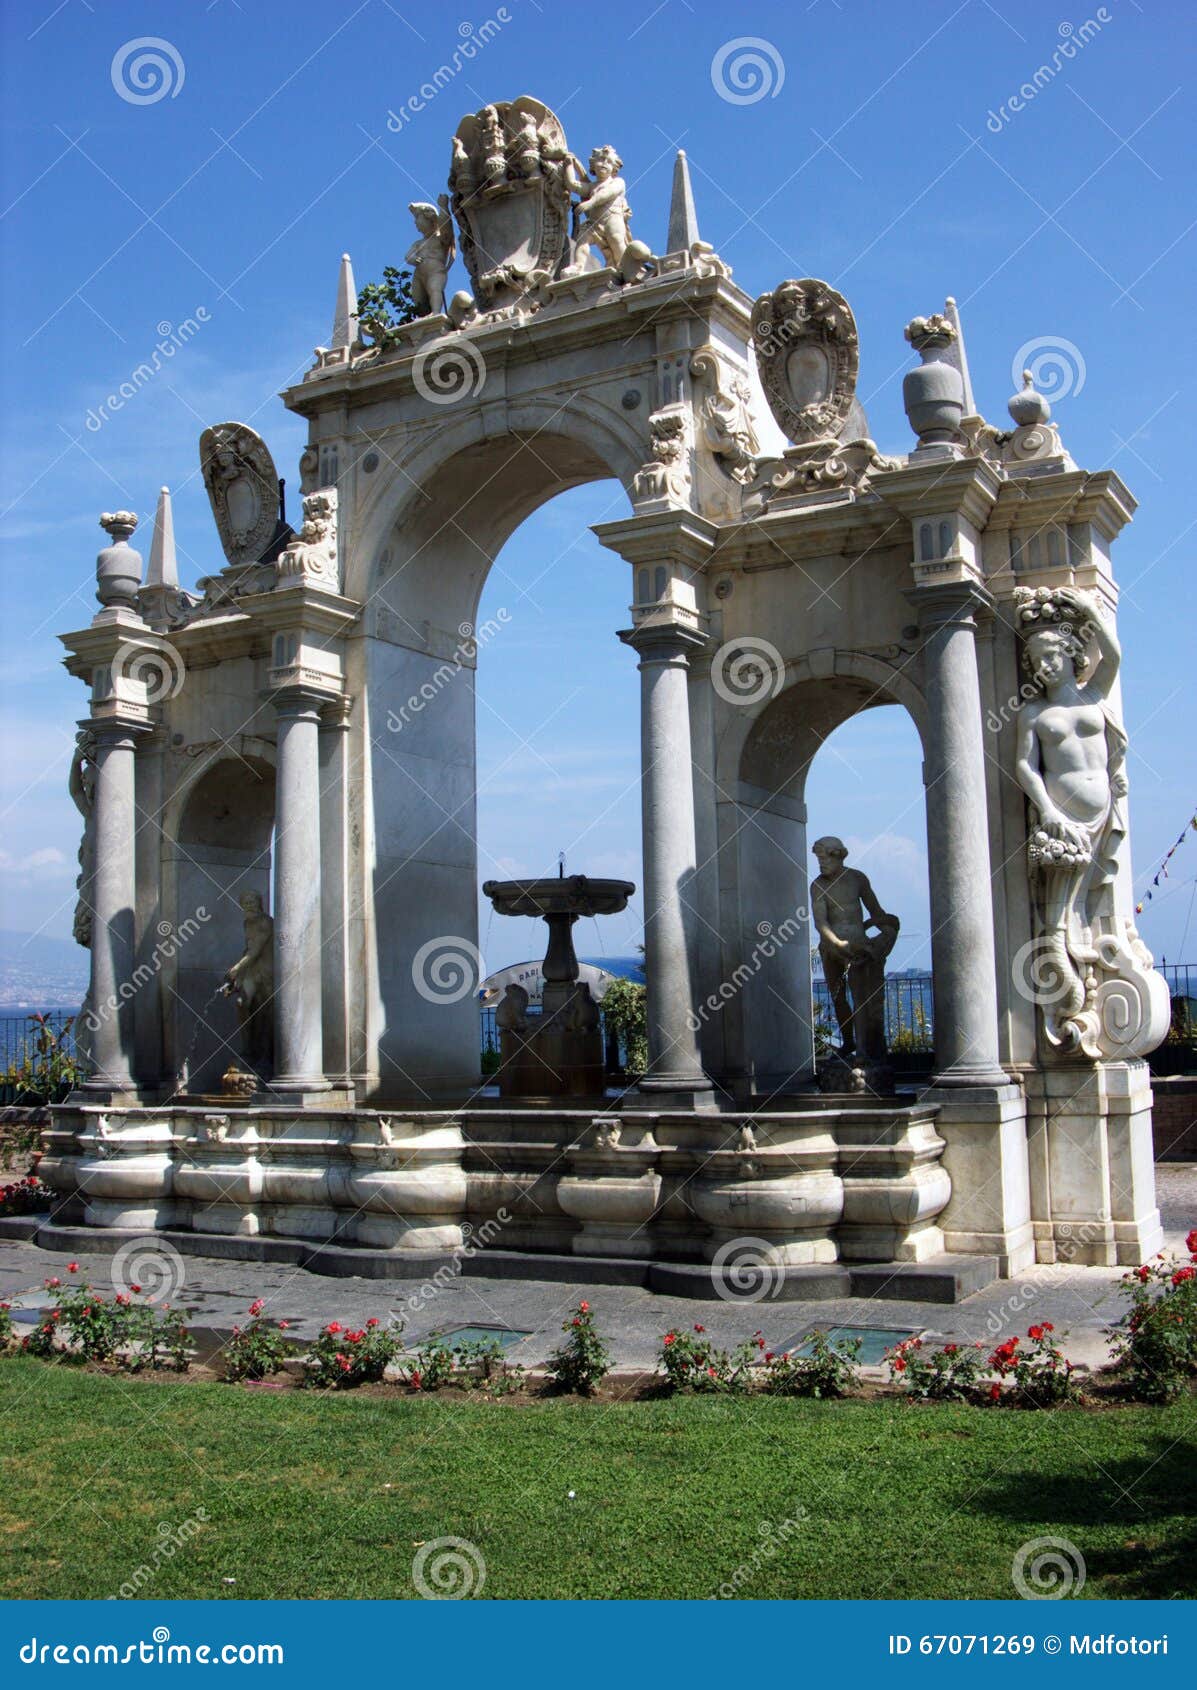 the fontana del gigante,immacolatella,fountain of the giant in naples-italy